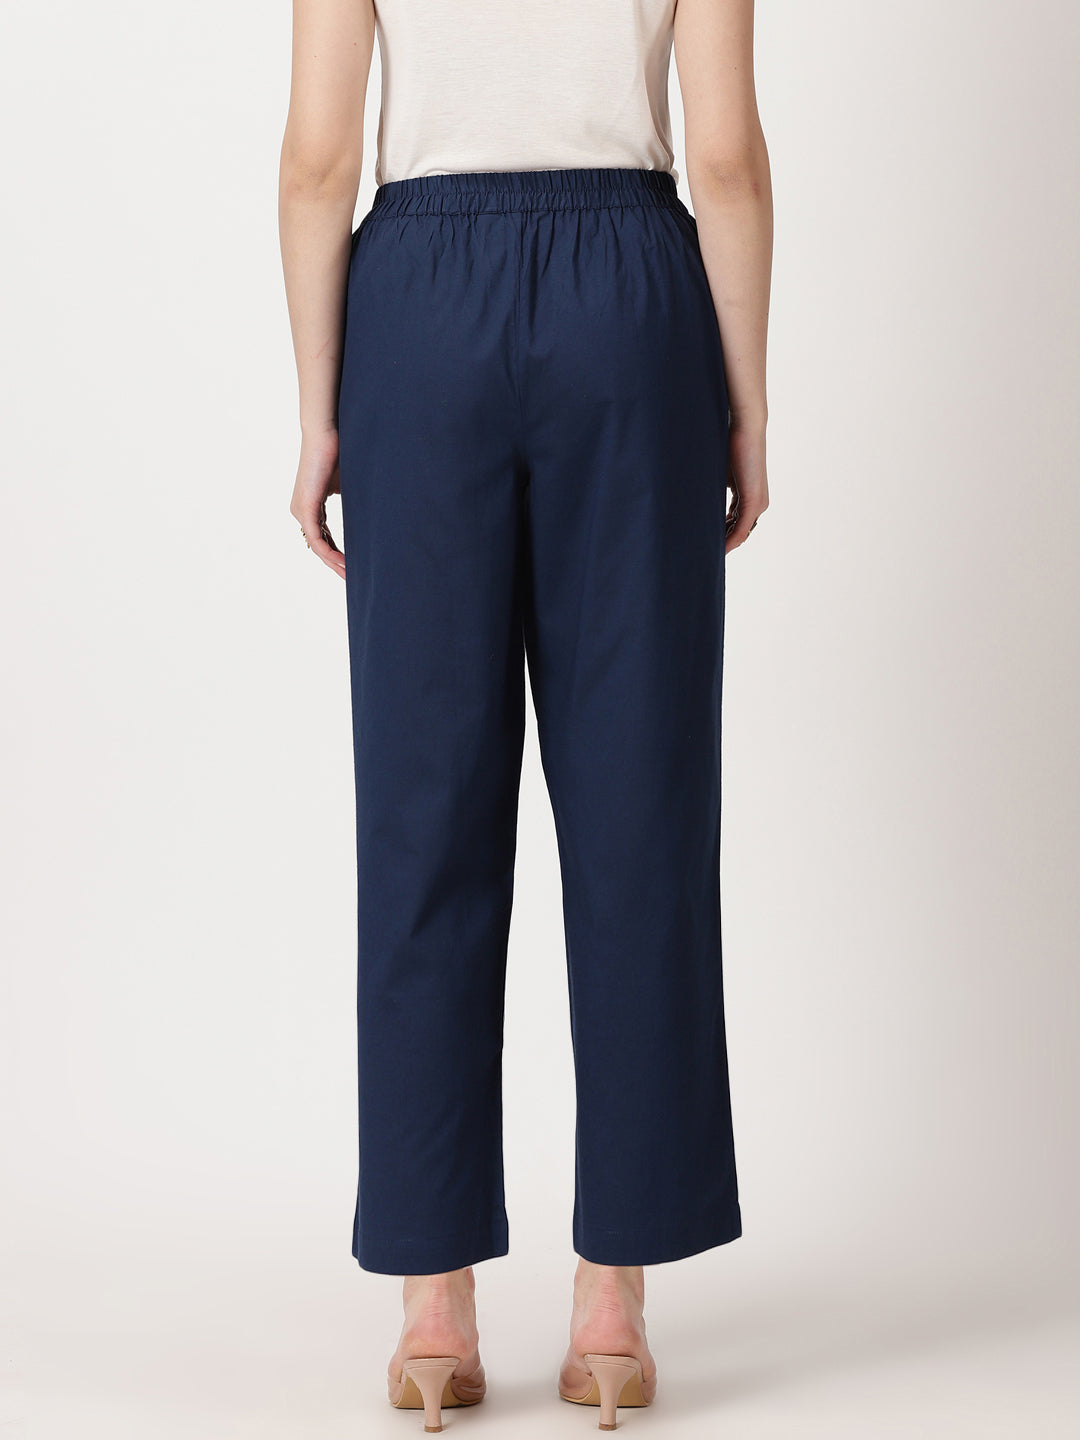 Navy Blue Solid Cotton Palazzos